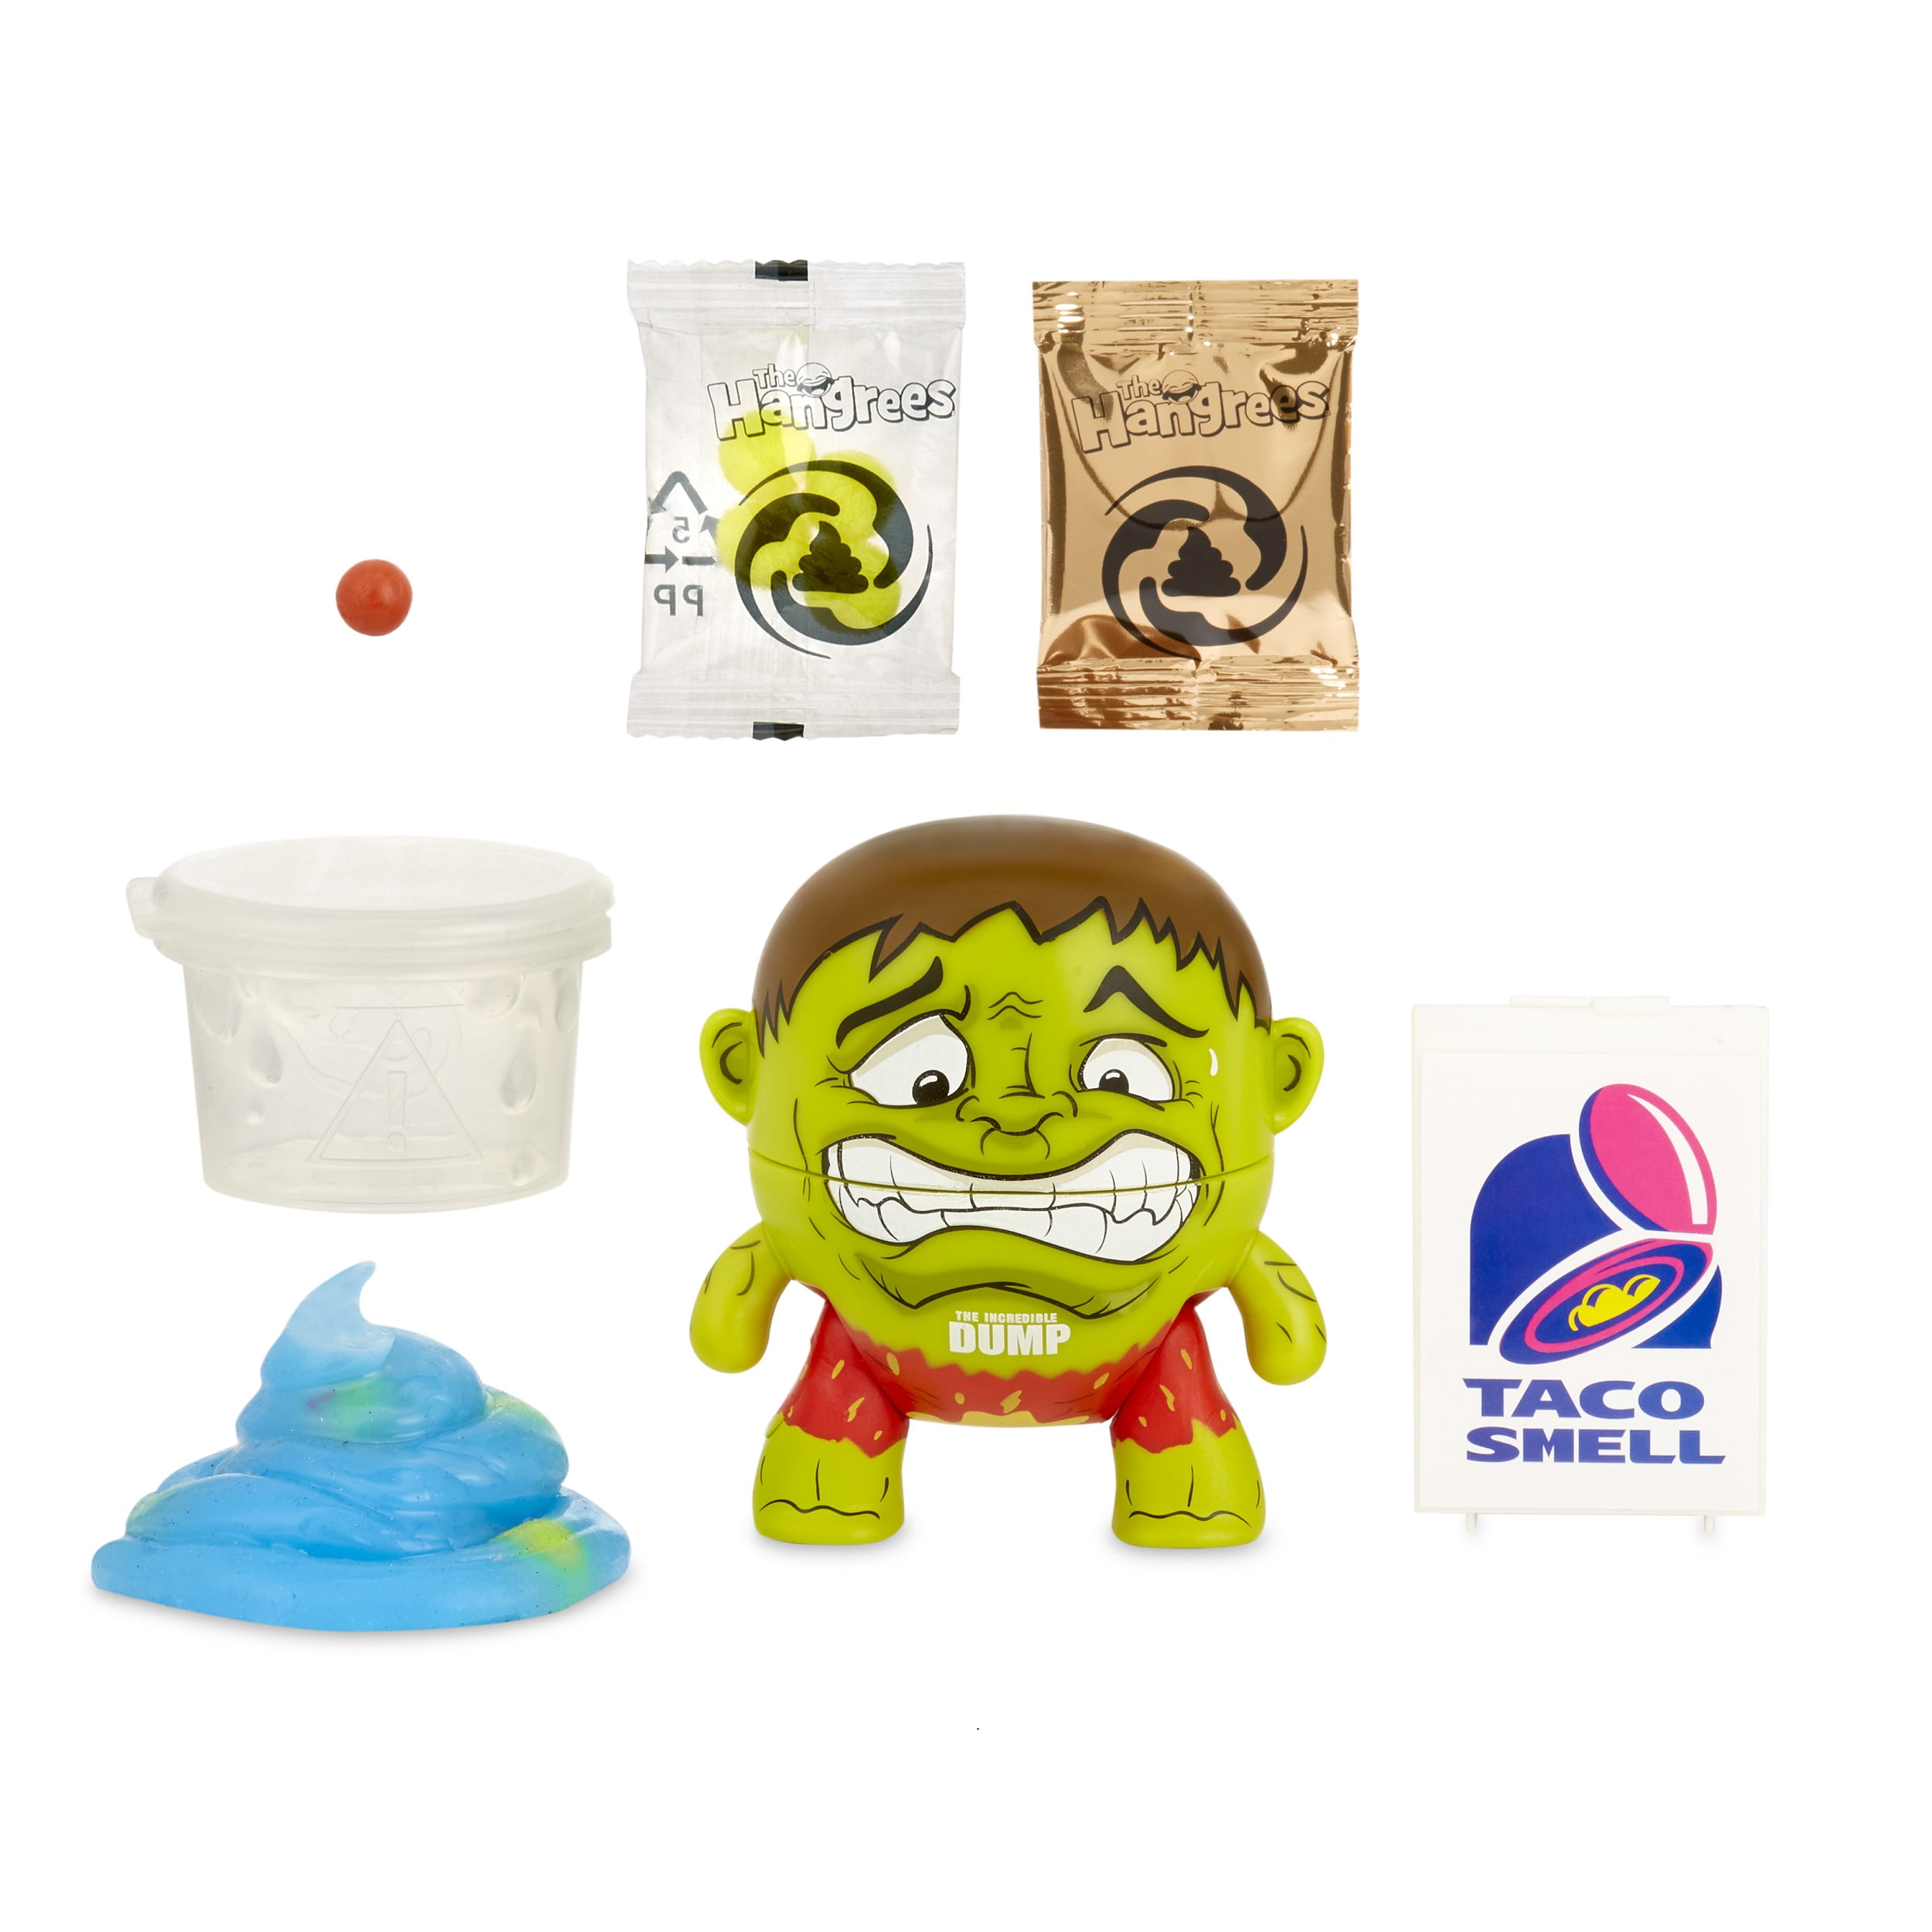 Hangrees The Mutant Turds Collectible Parody Figure with Slime 